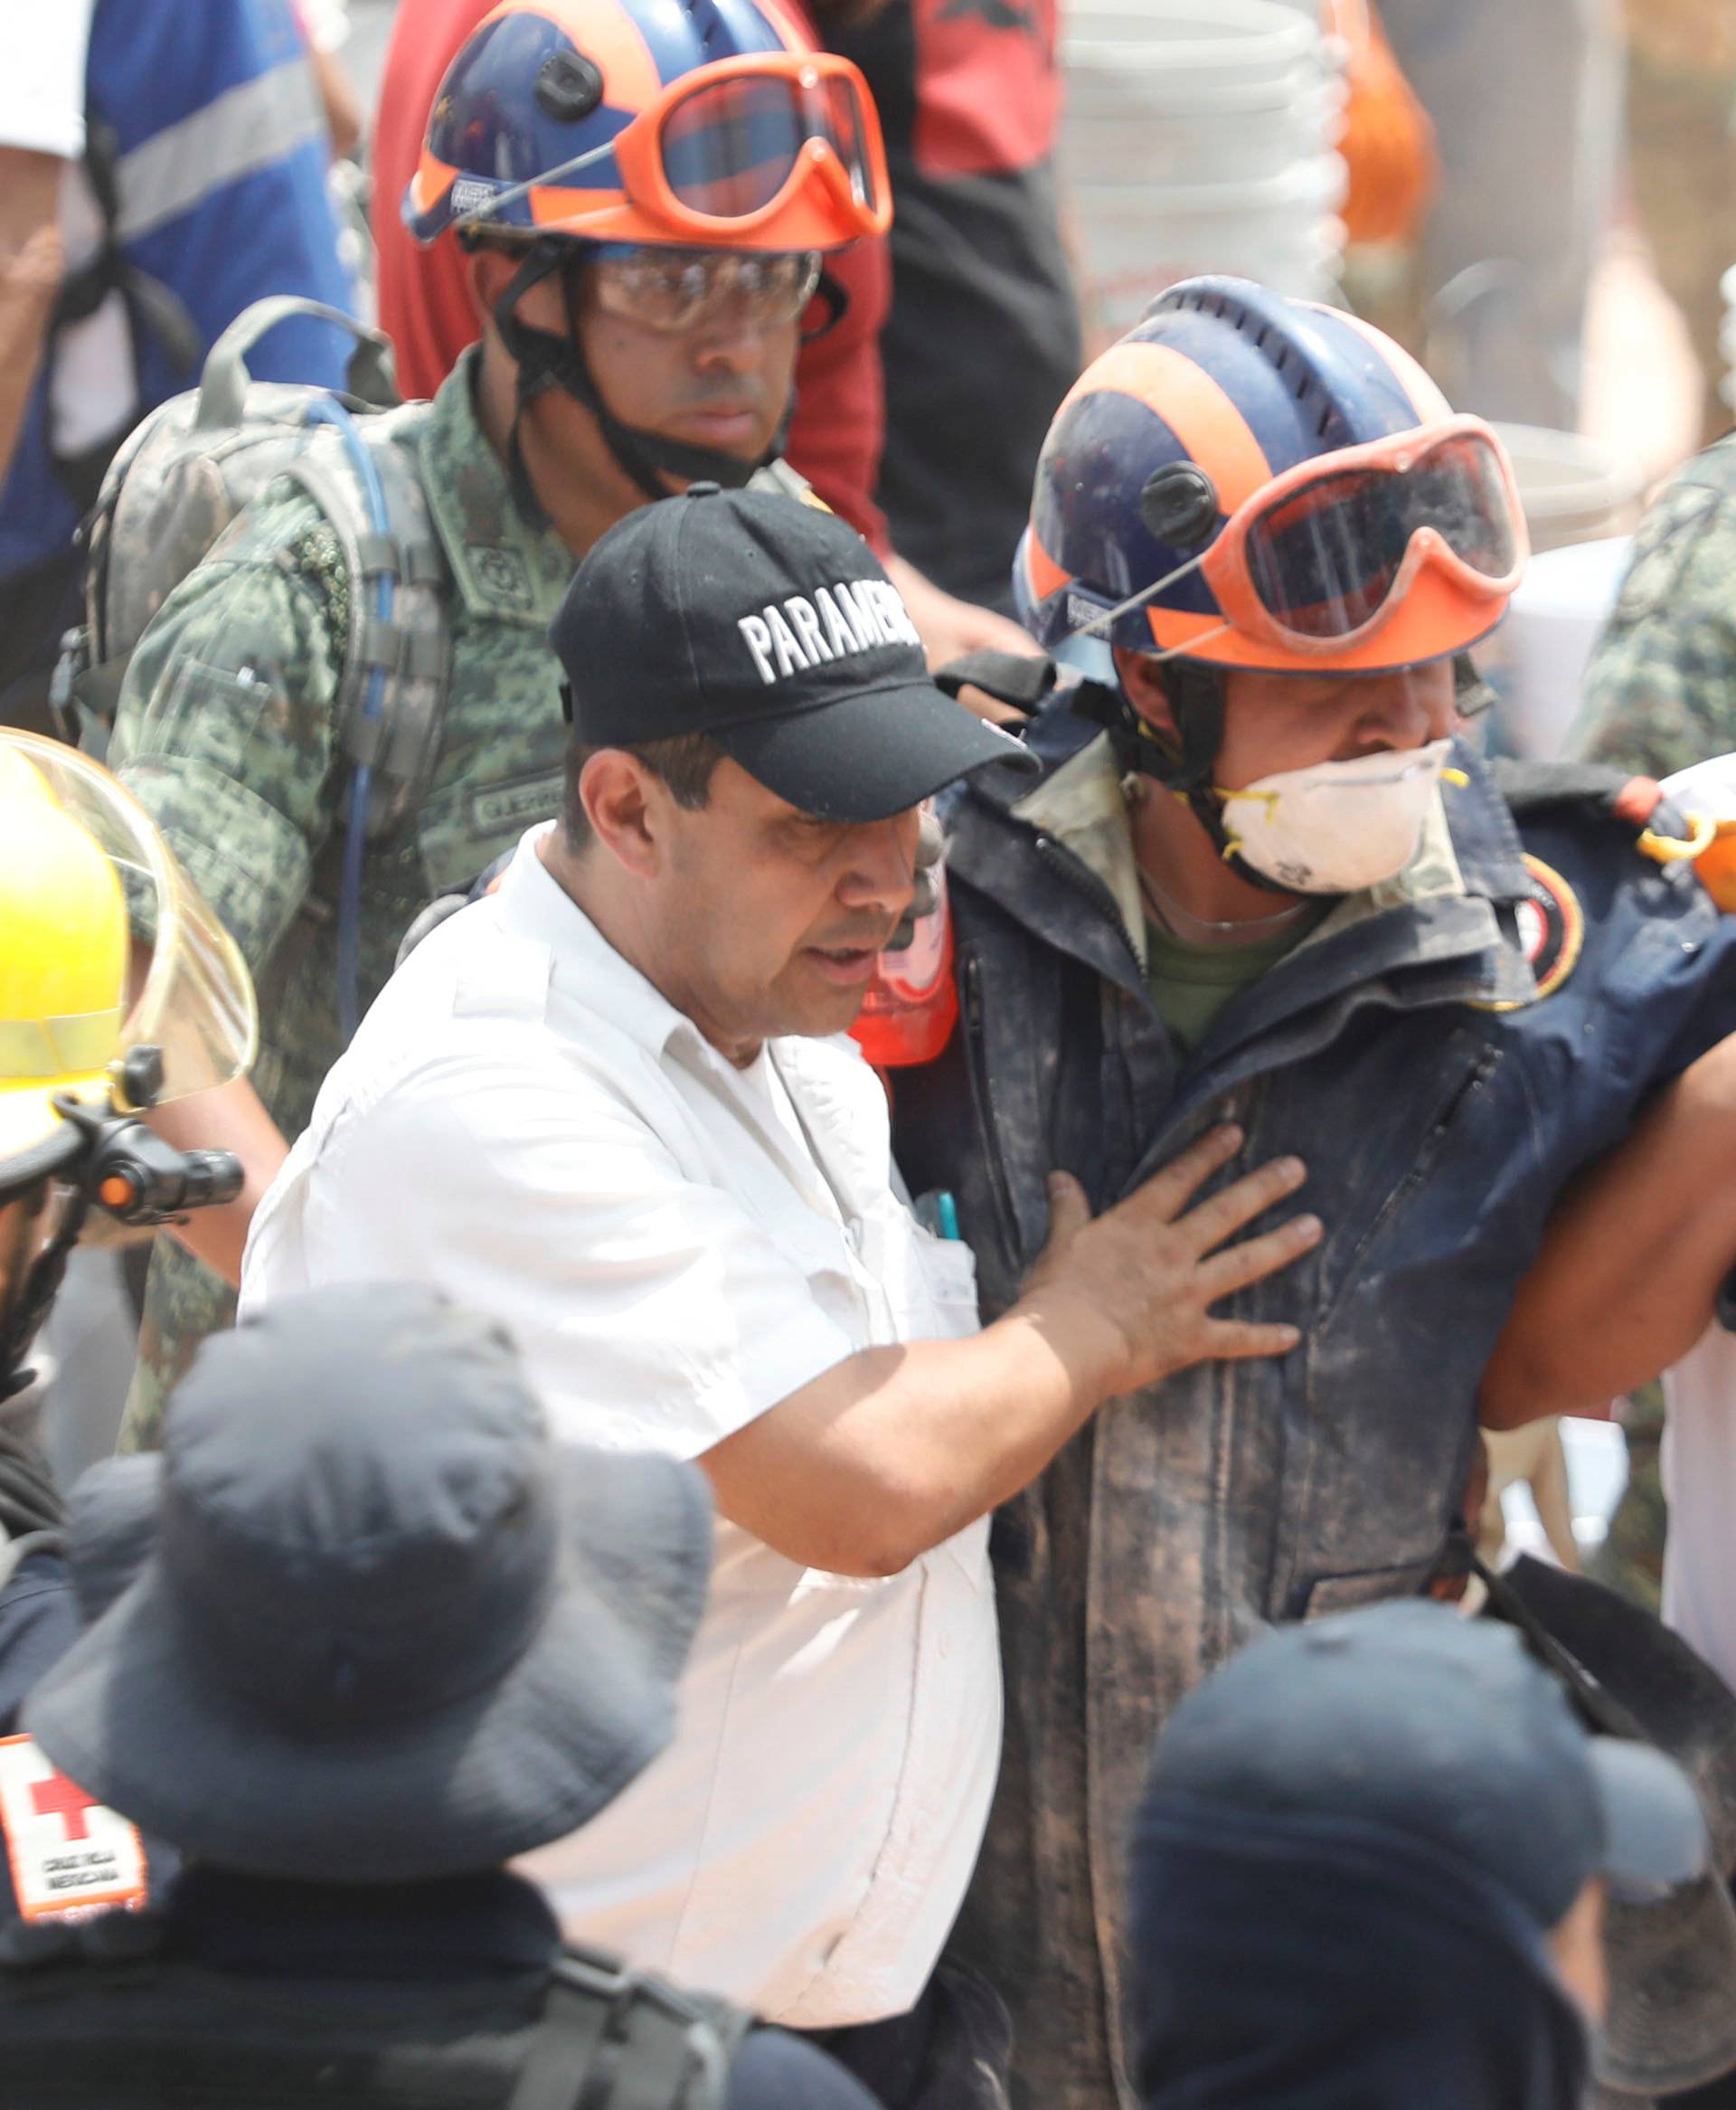 A rescue worker is helped during the search for students at Enrique Rebsamen school after an earthquake in Mexico City